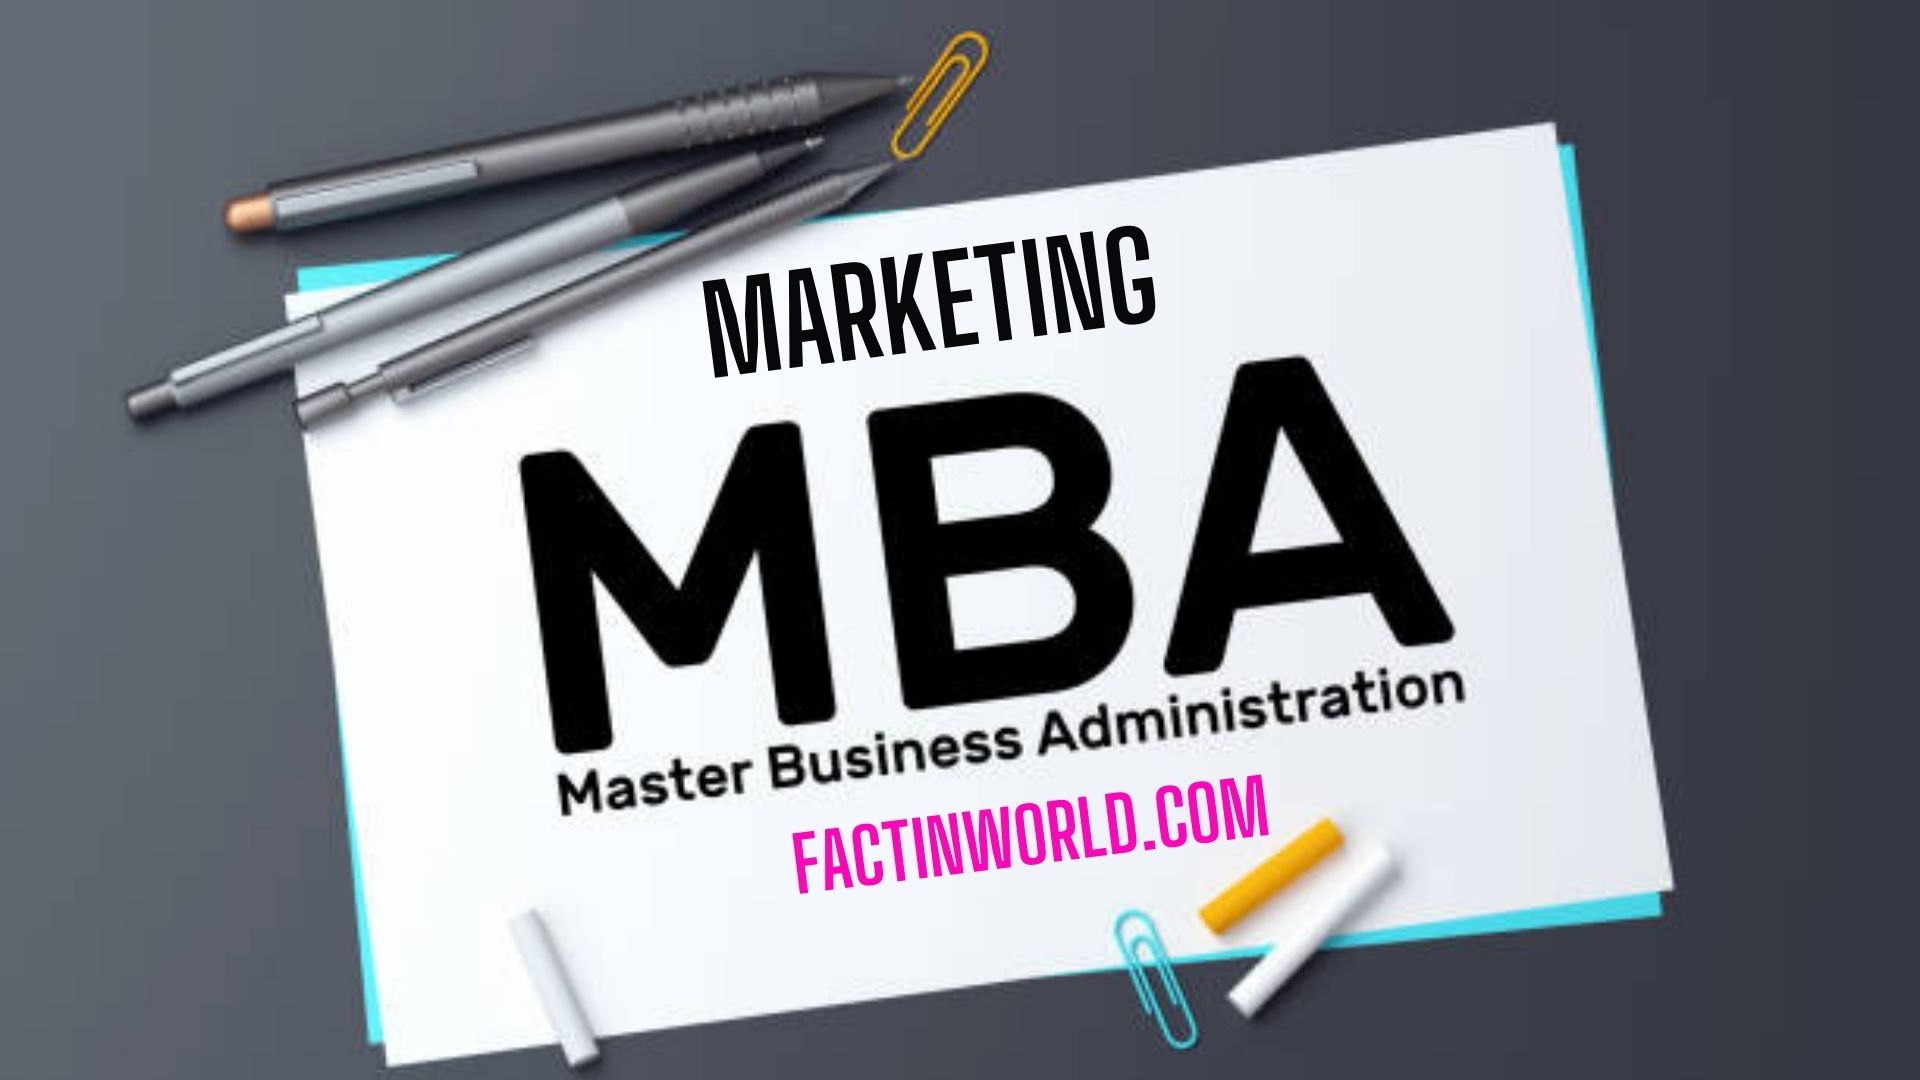 The 10 Best MBA Programs for Marketing 2023